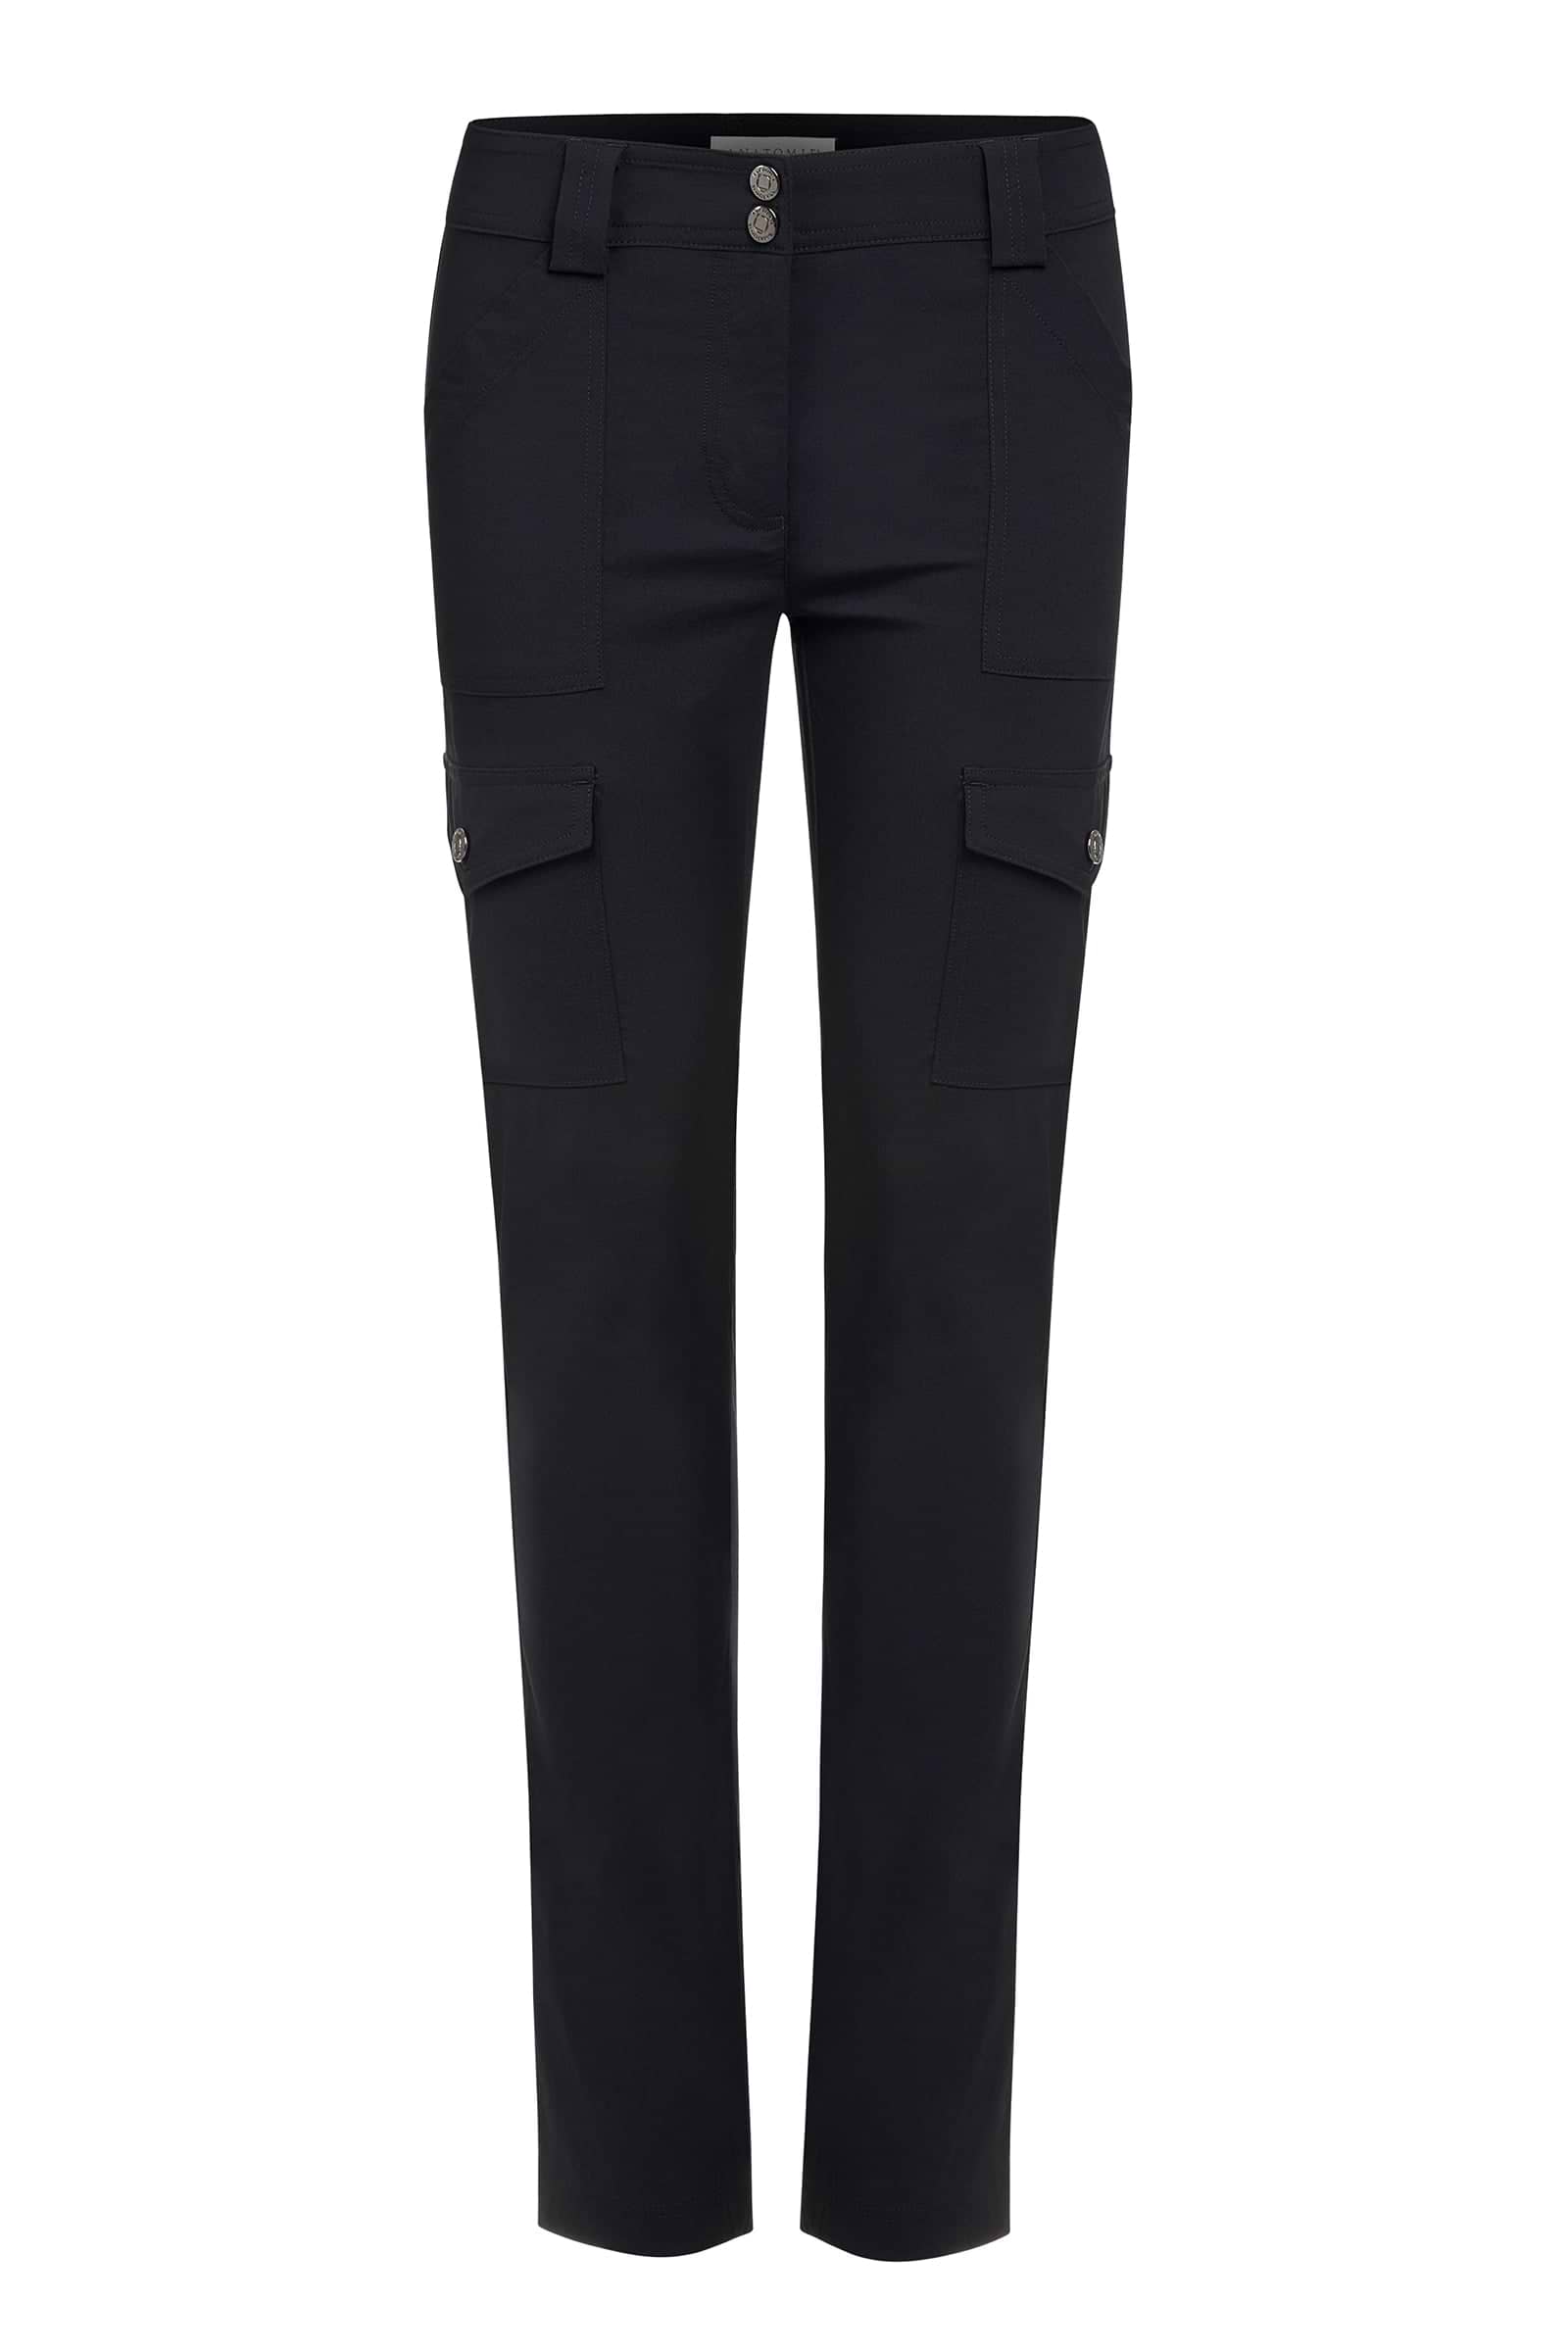 The Kate Pant / Noir – Revice